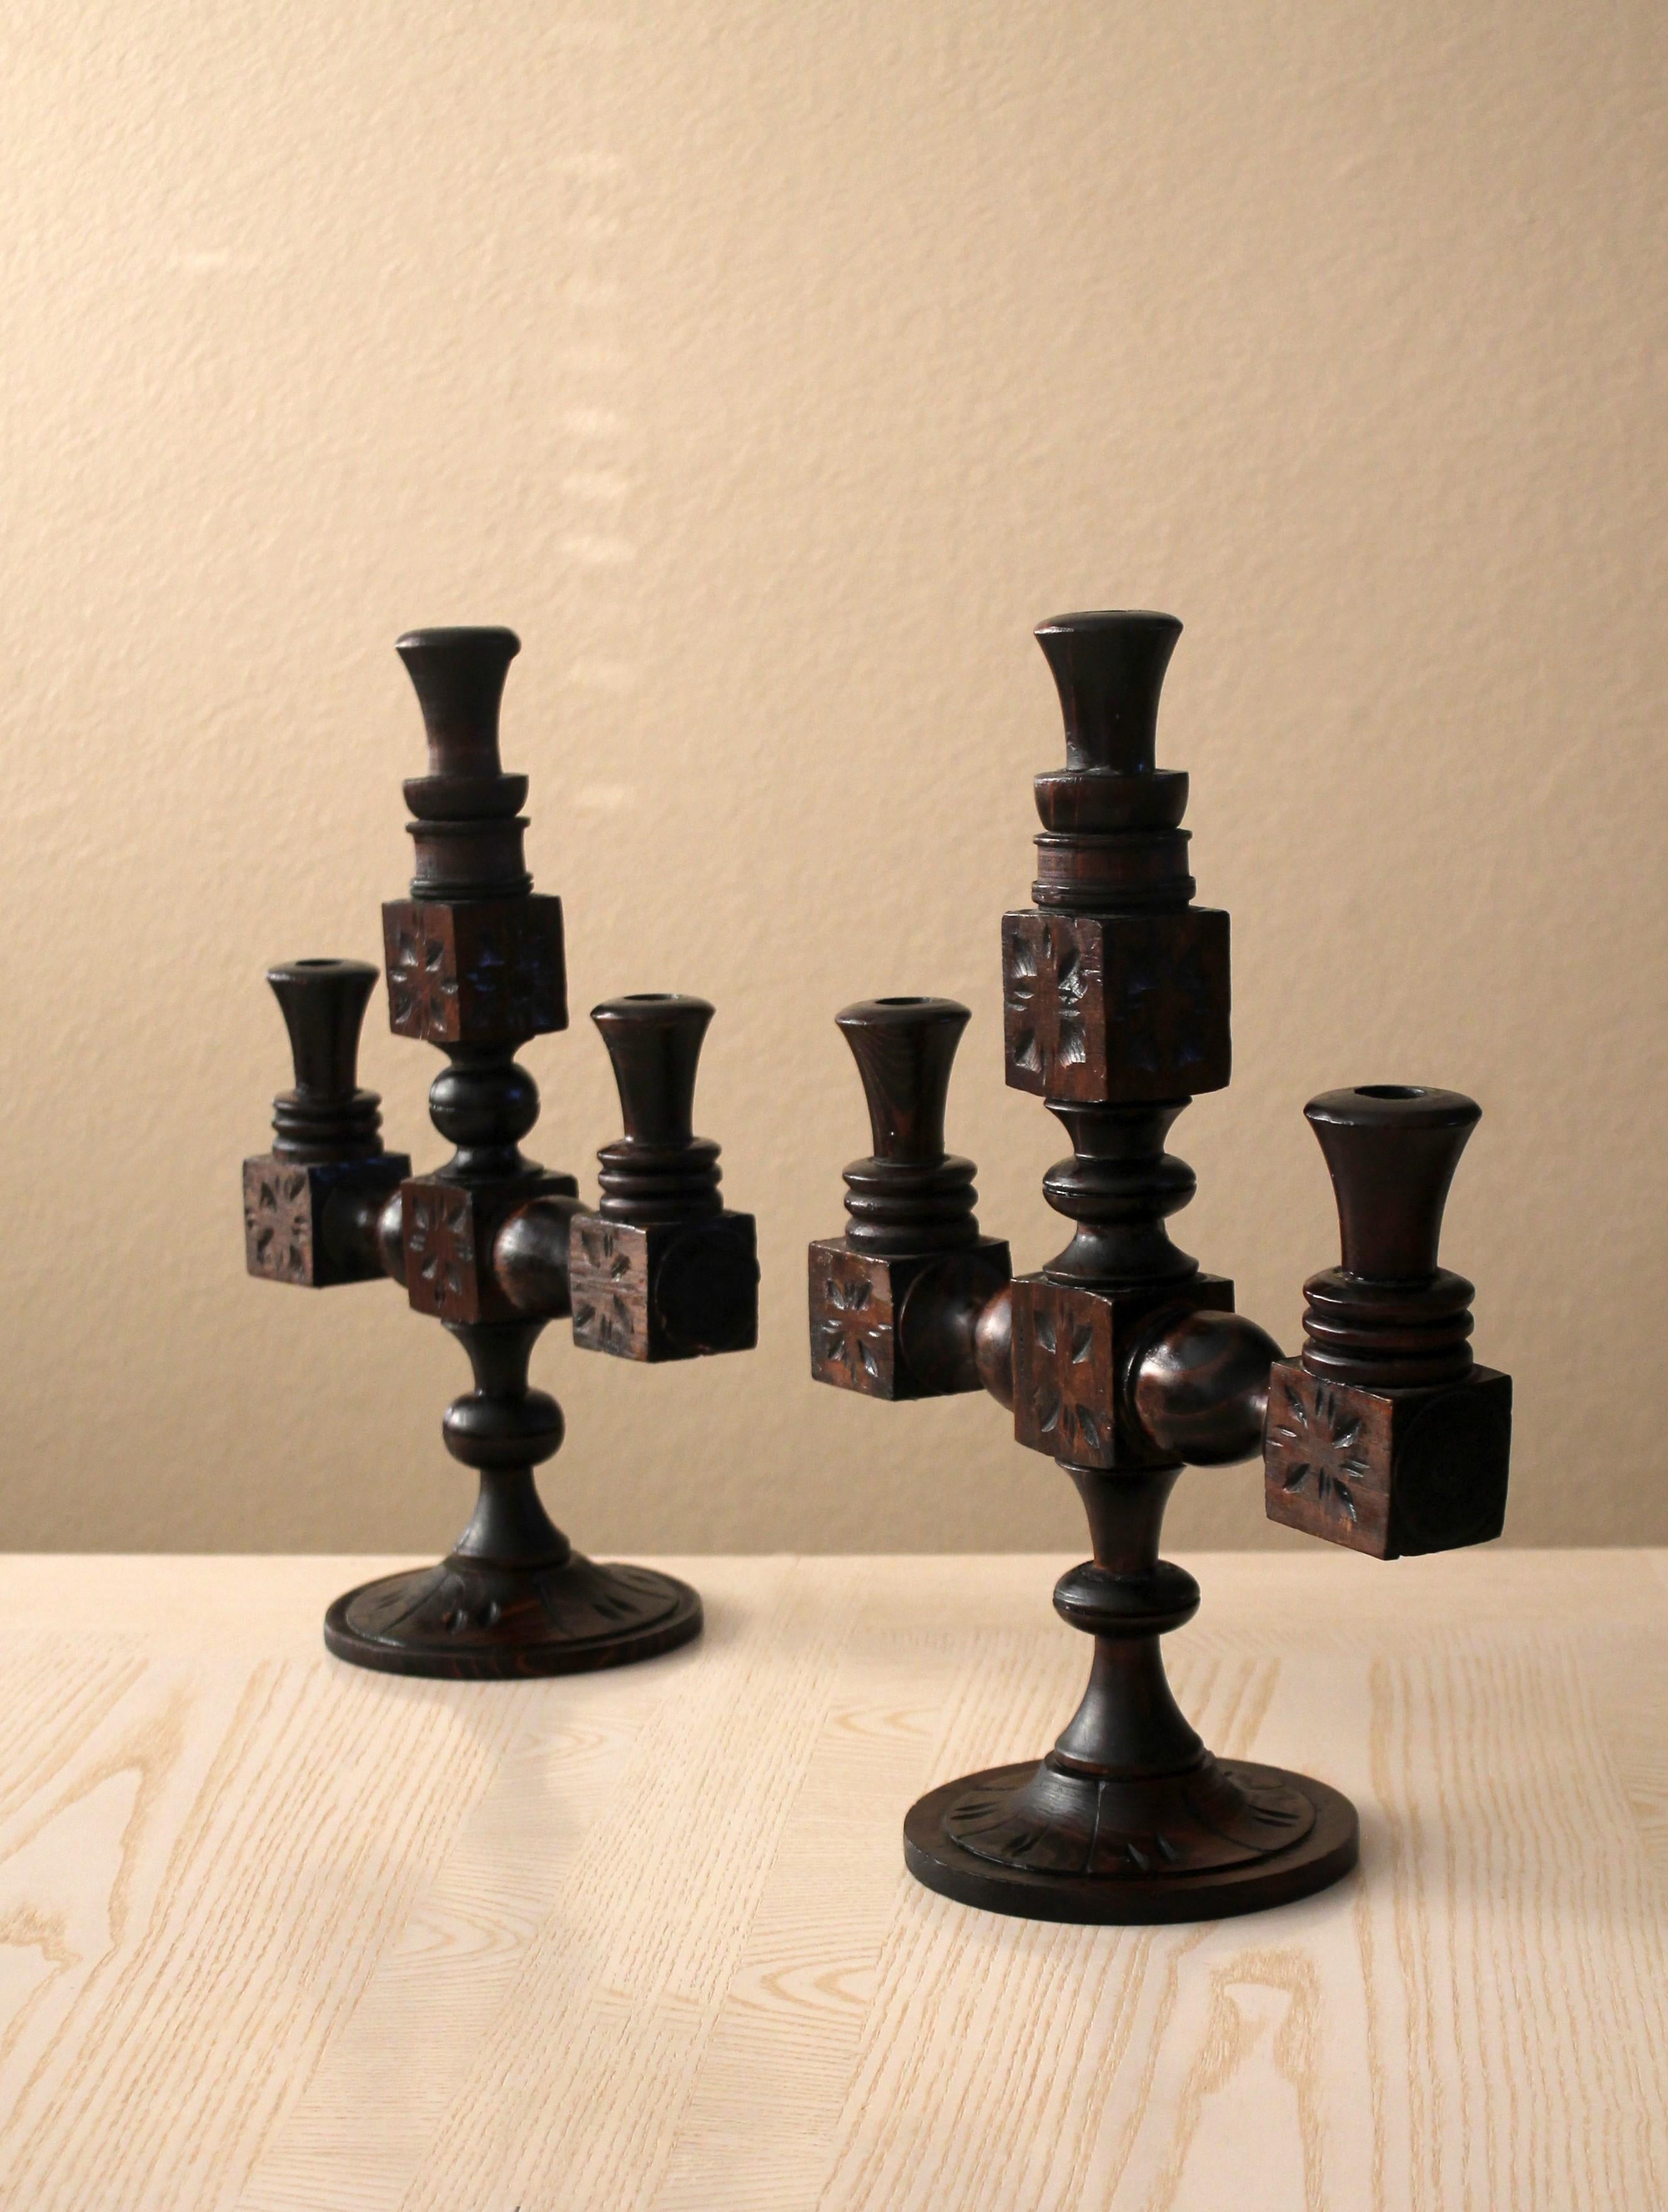 Romantic!

Spanish Candelabra
Gothic Revival
Dark Wood

Approximate Dimensions: 15